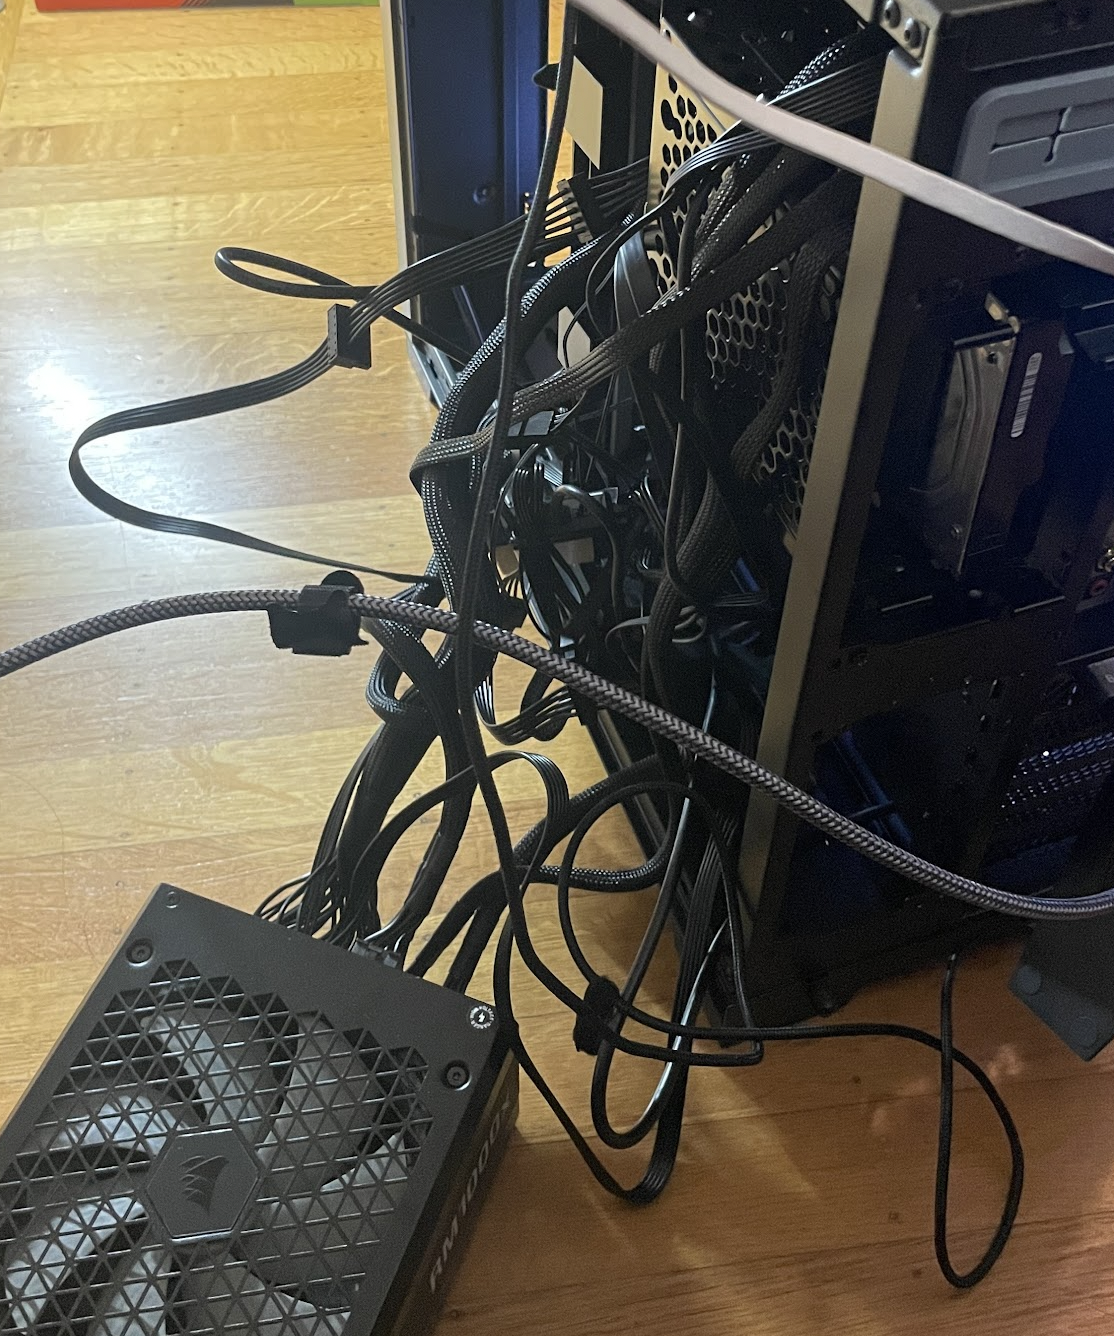 Connecting to the PSU